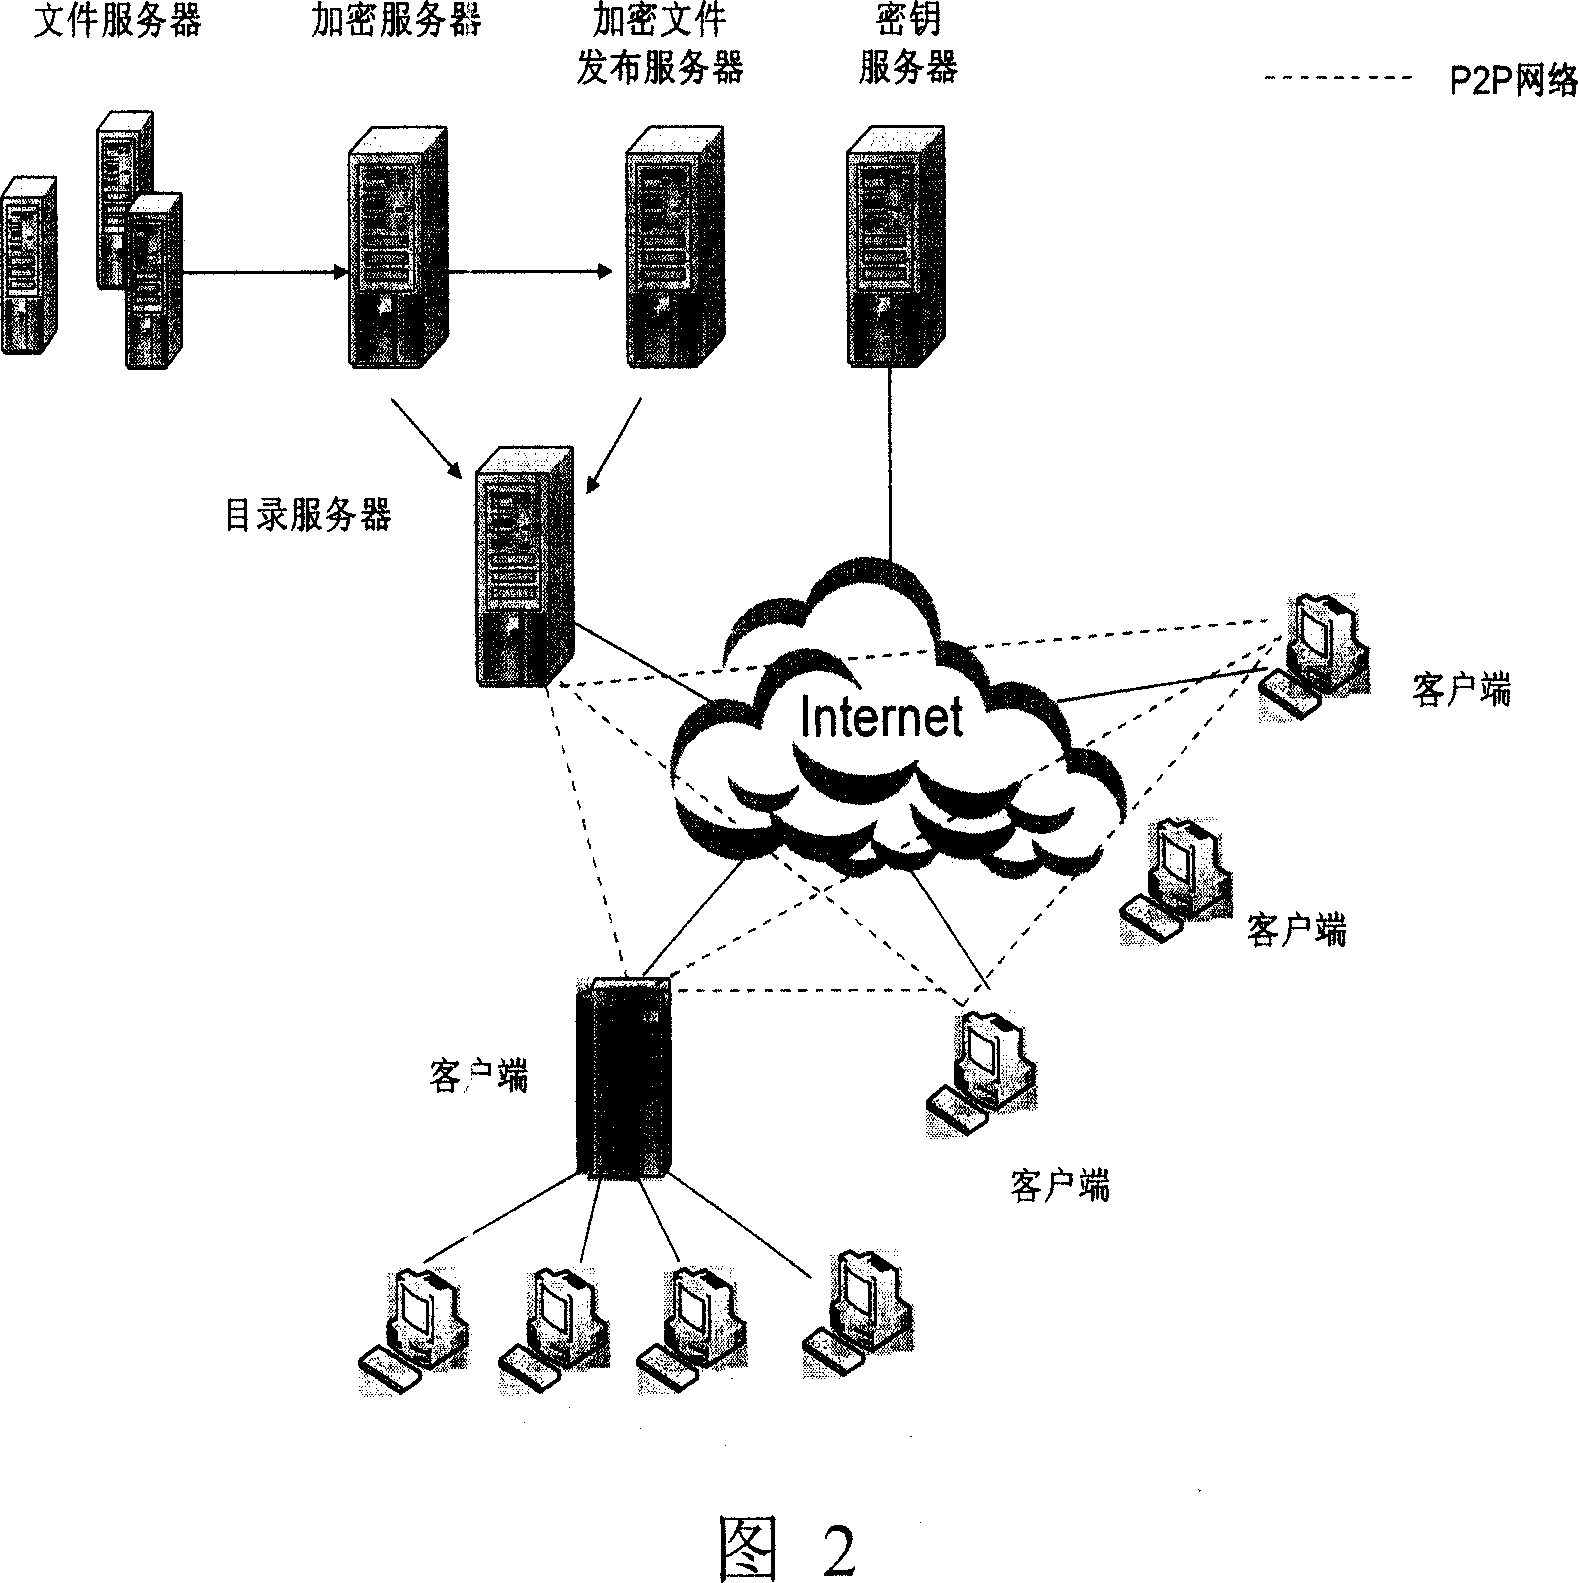 System supporting downloading and using of distributed encrypted document